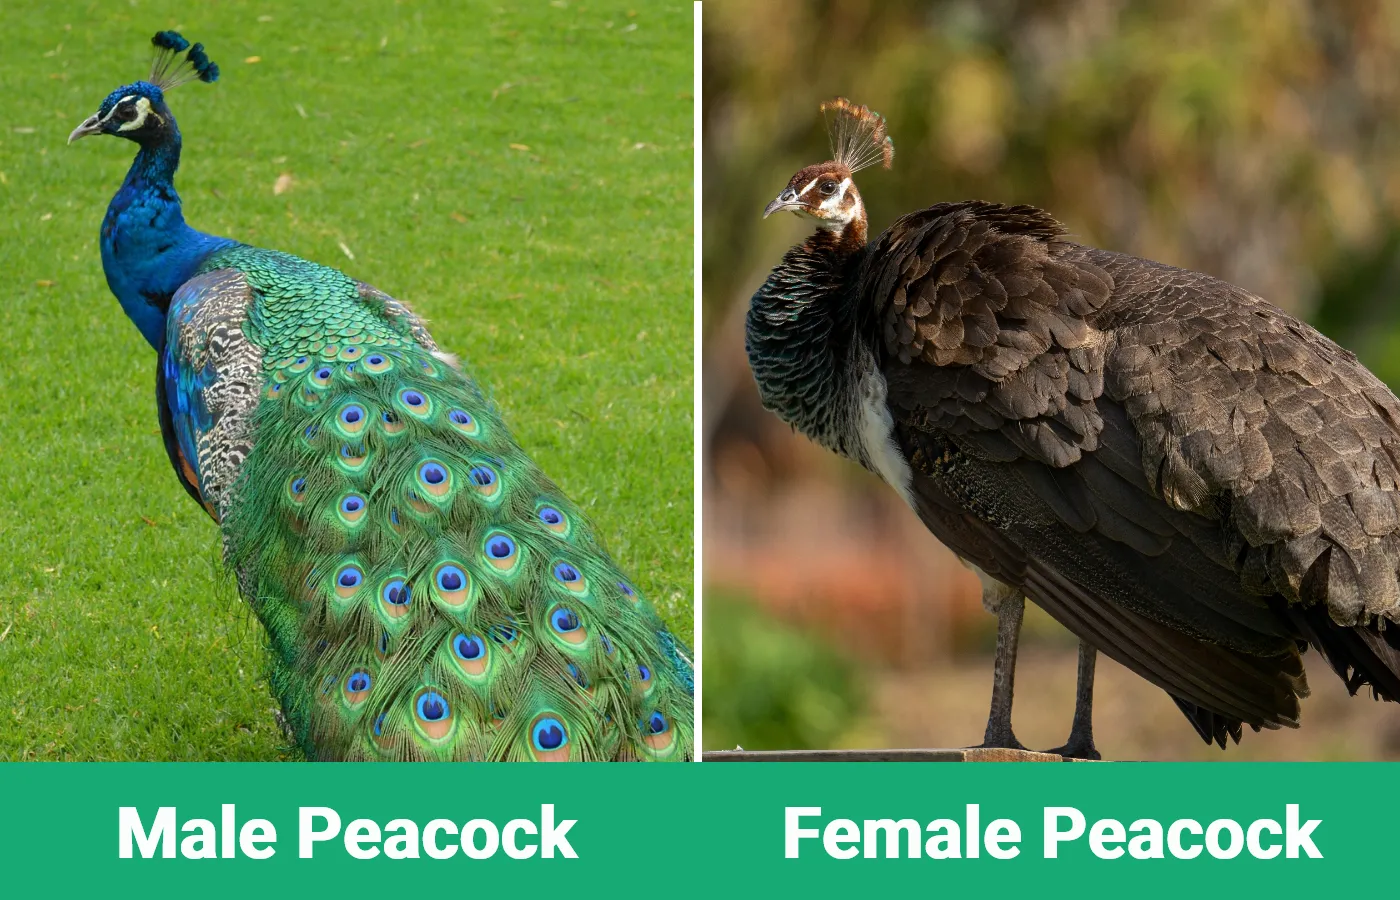 Male Peacock vs Female Peacock - Visual Differences